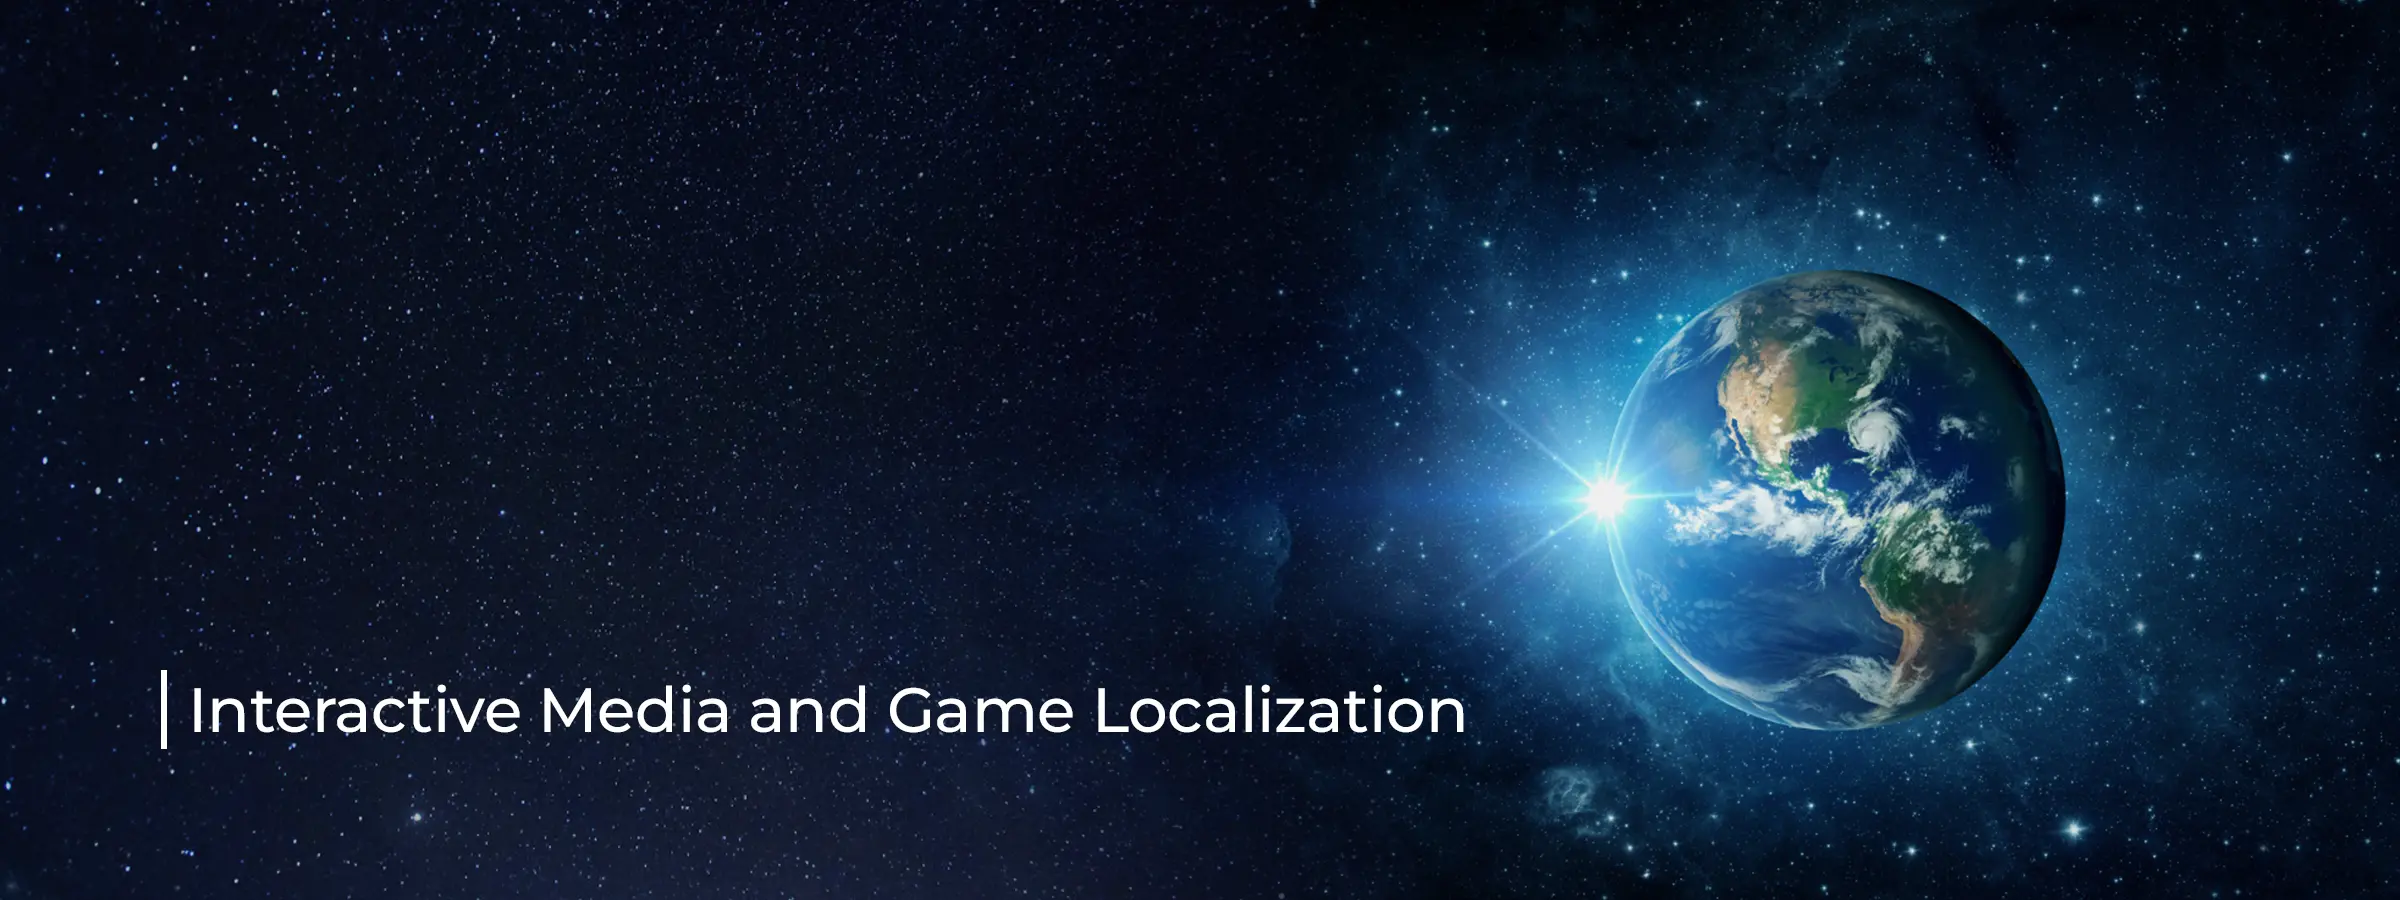 game-localization-service-industry